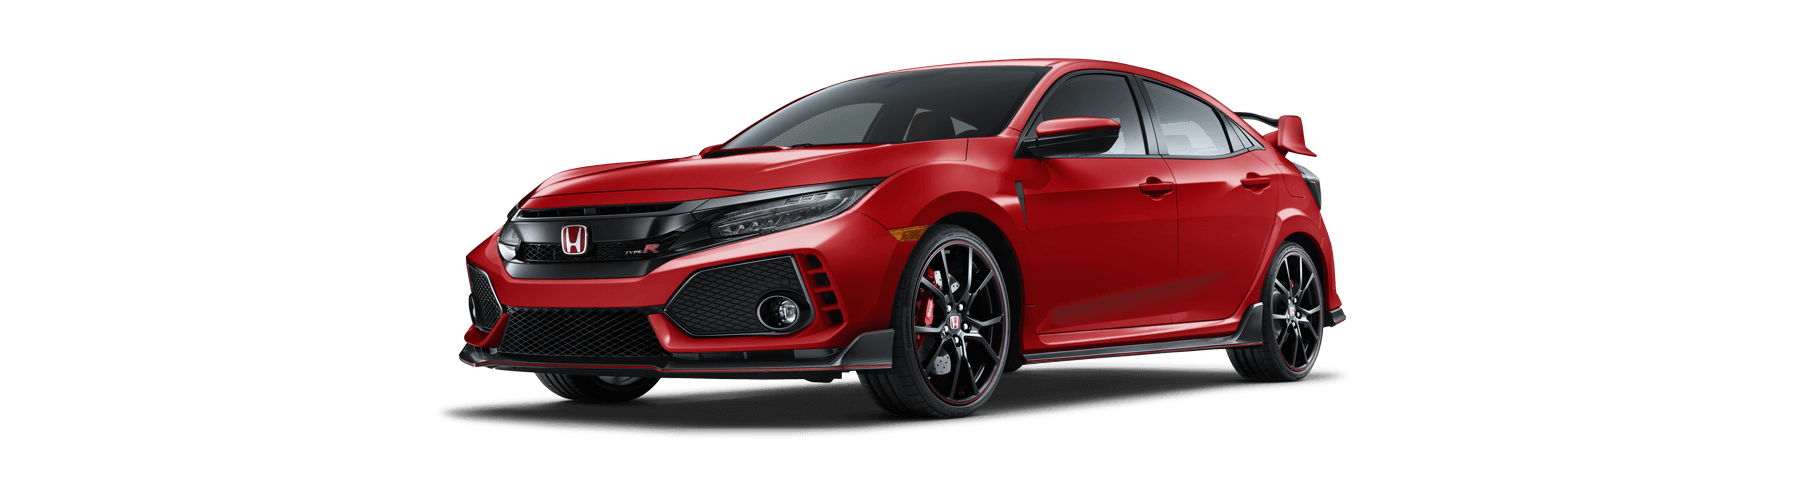 Honda Civic Type R PNG Picture